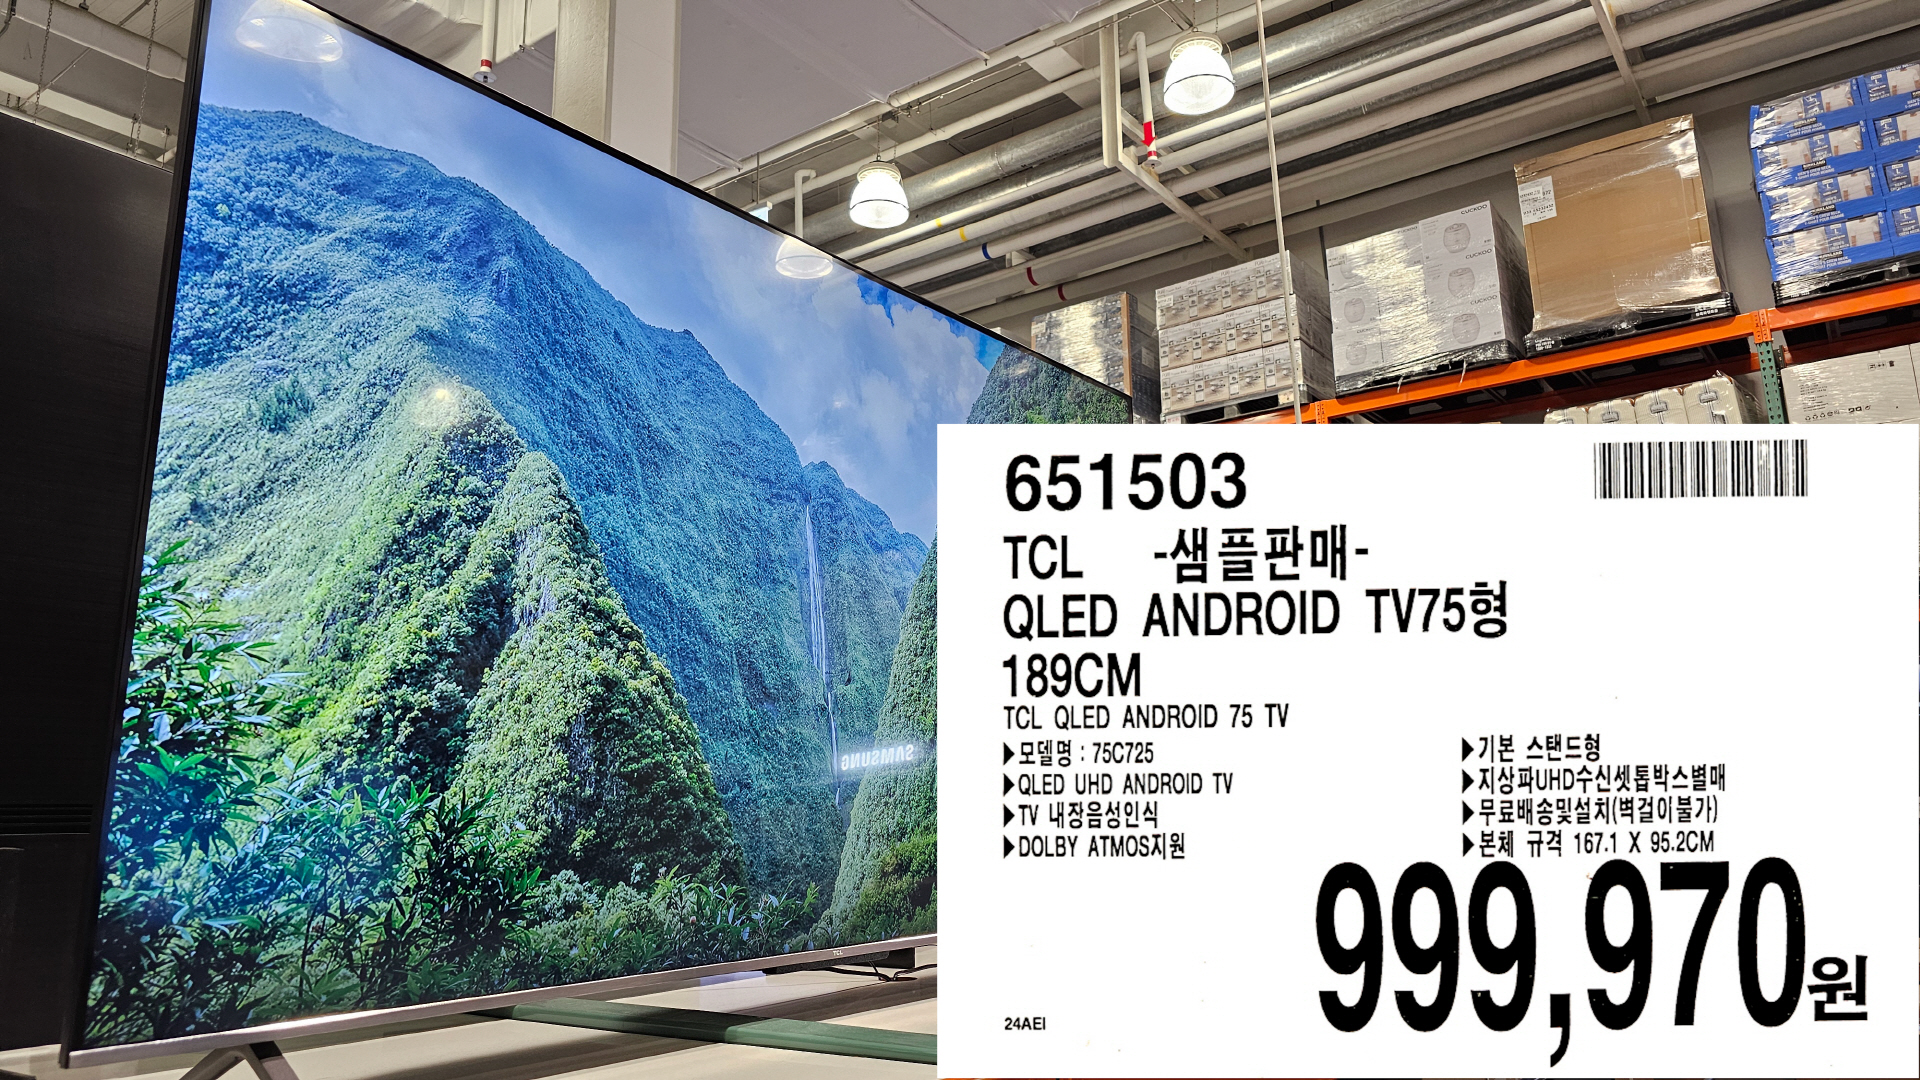 TCL QLED ANDROID 75 TV